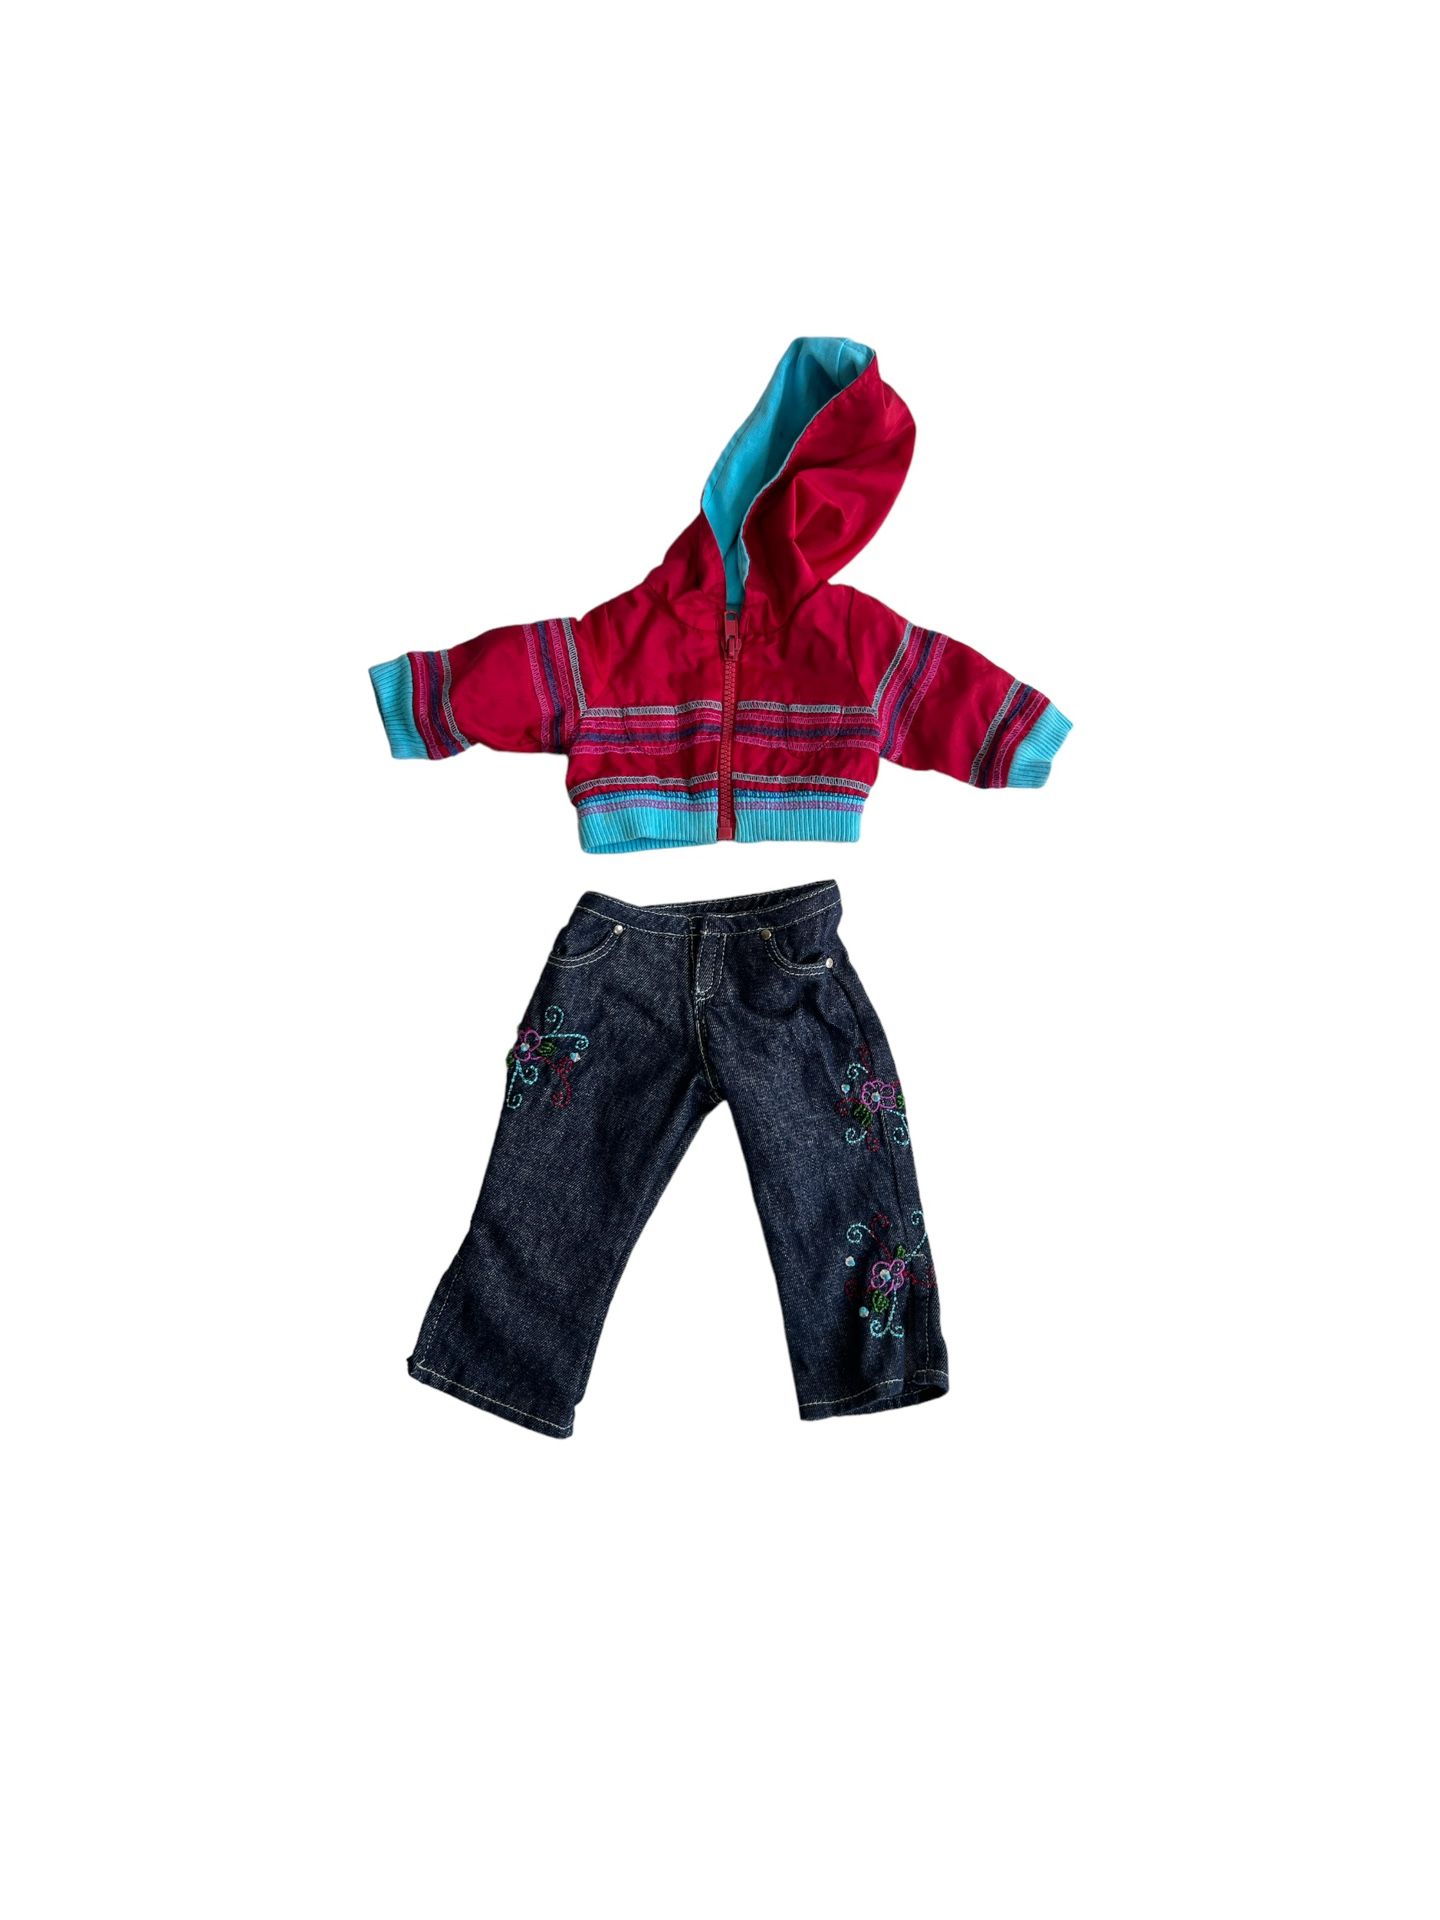 American Girl Doll Ready For Fun JACKET JEANS ONLY